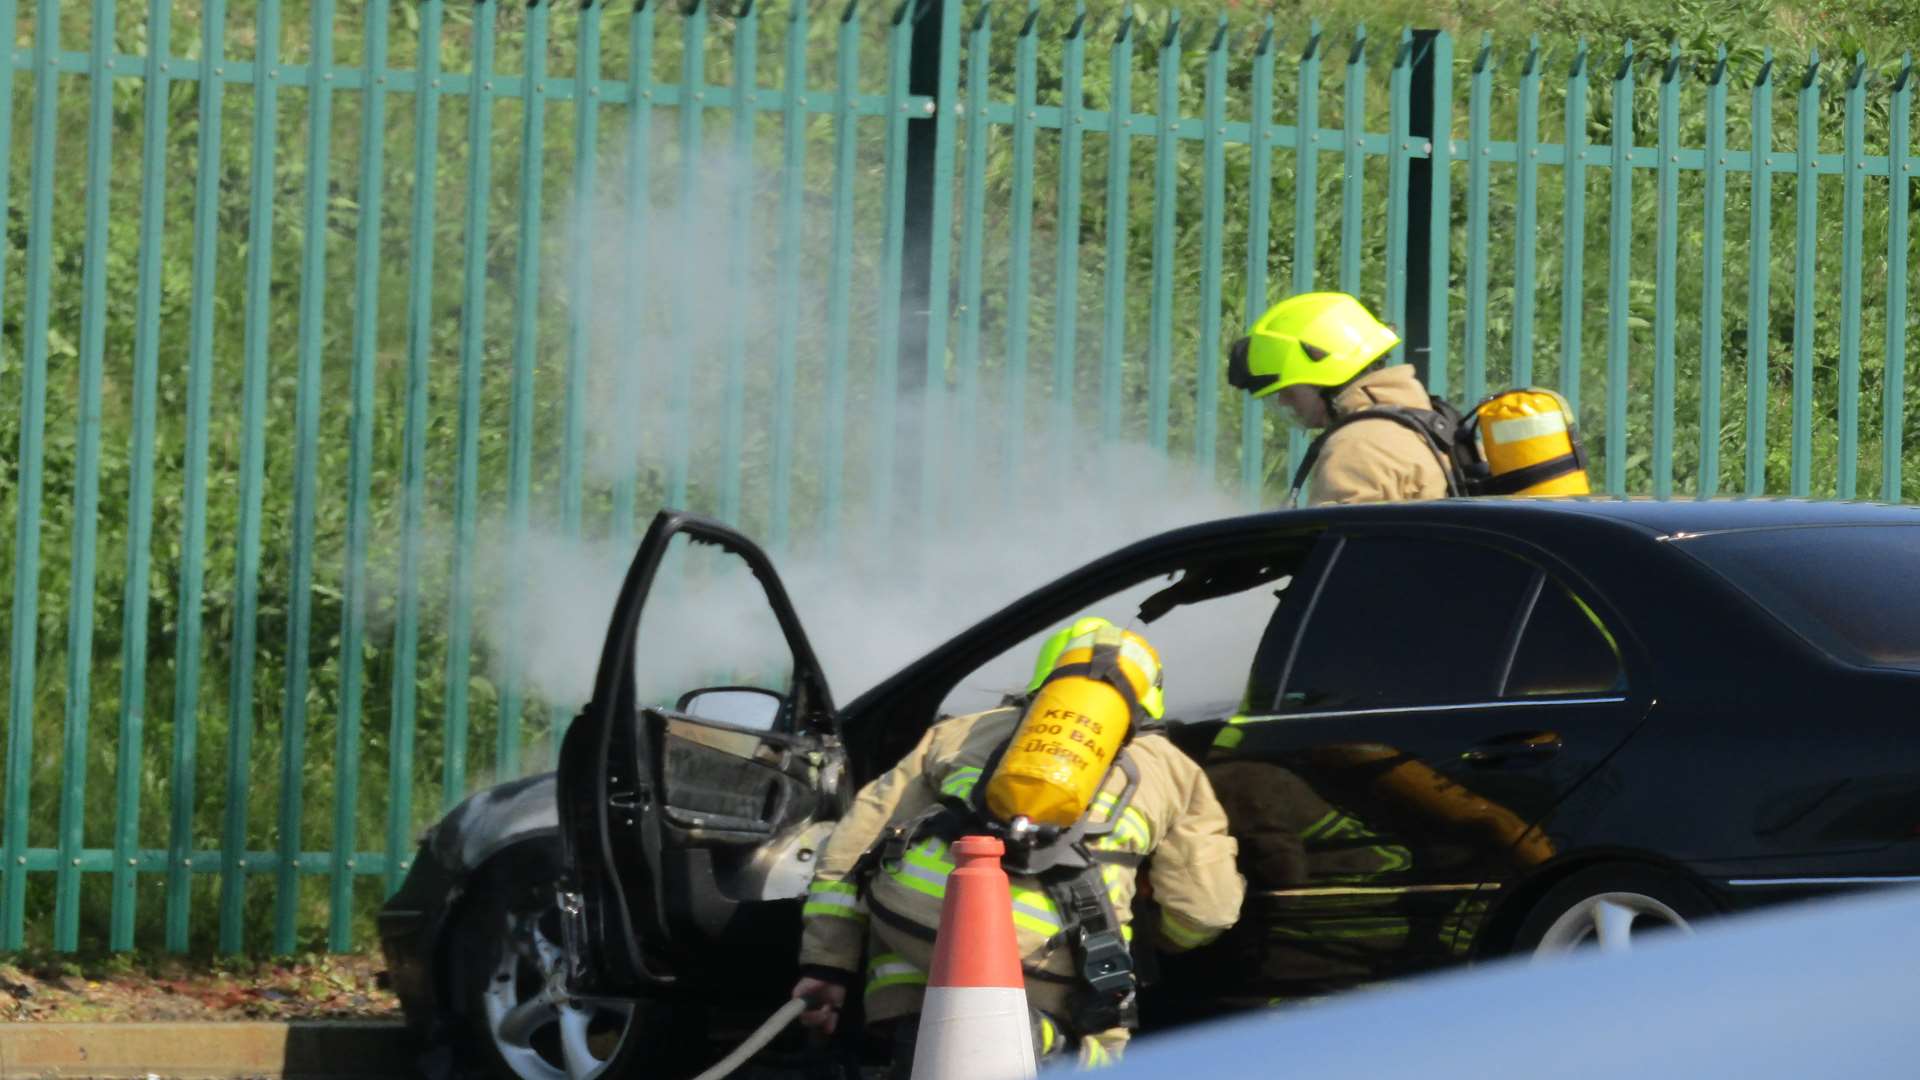 The car was on fire at the Park Farm Tesco store in Ashford